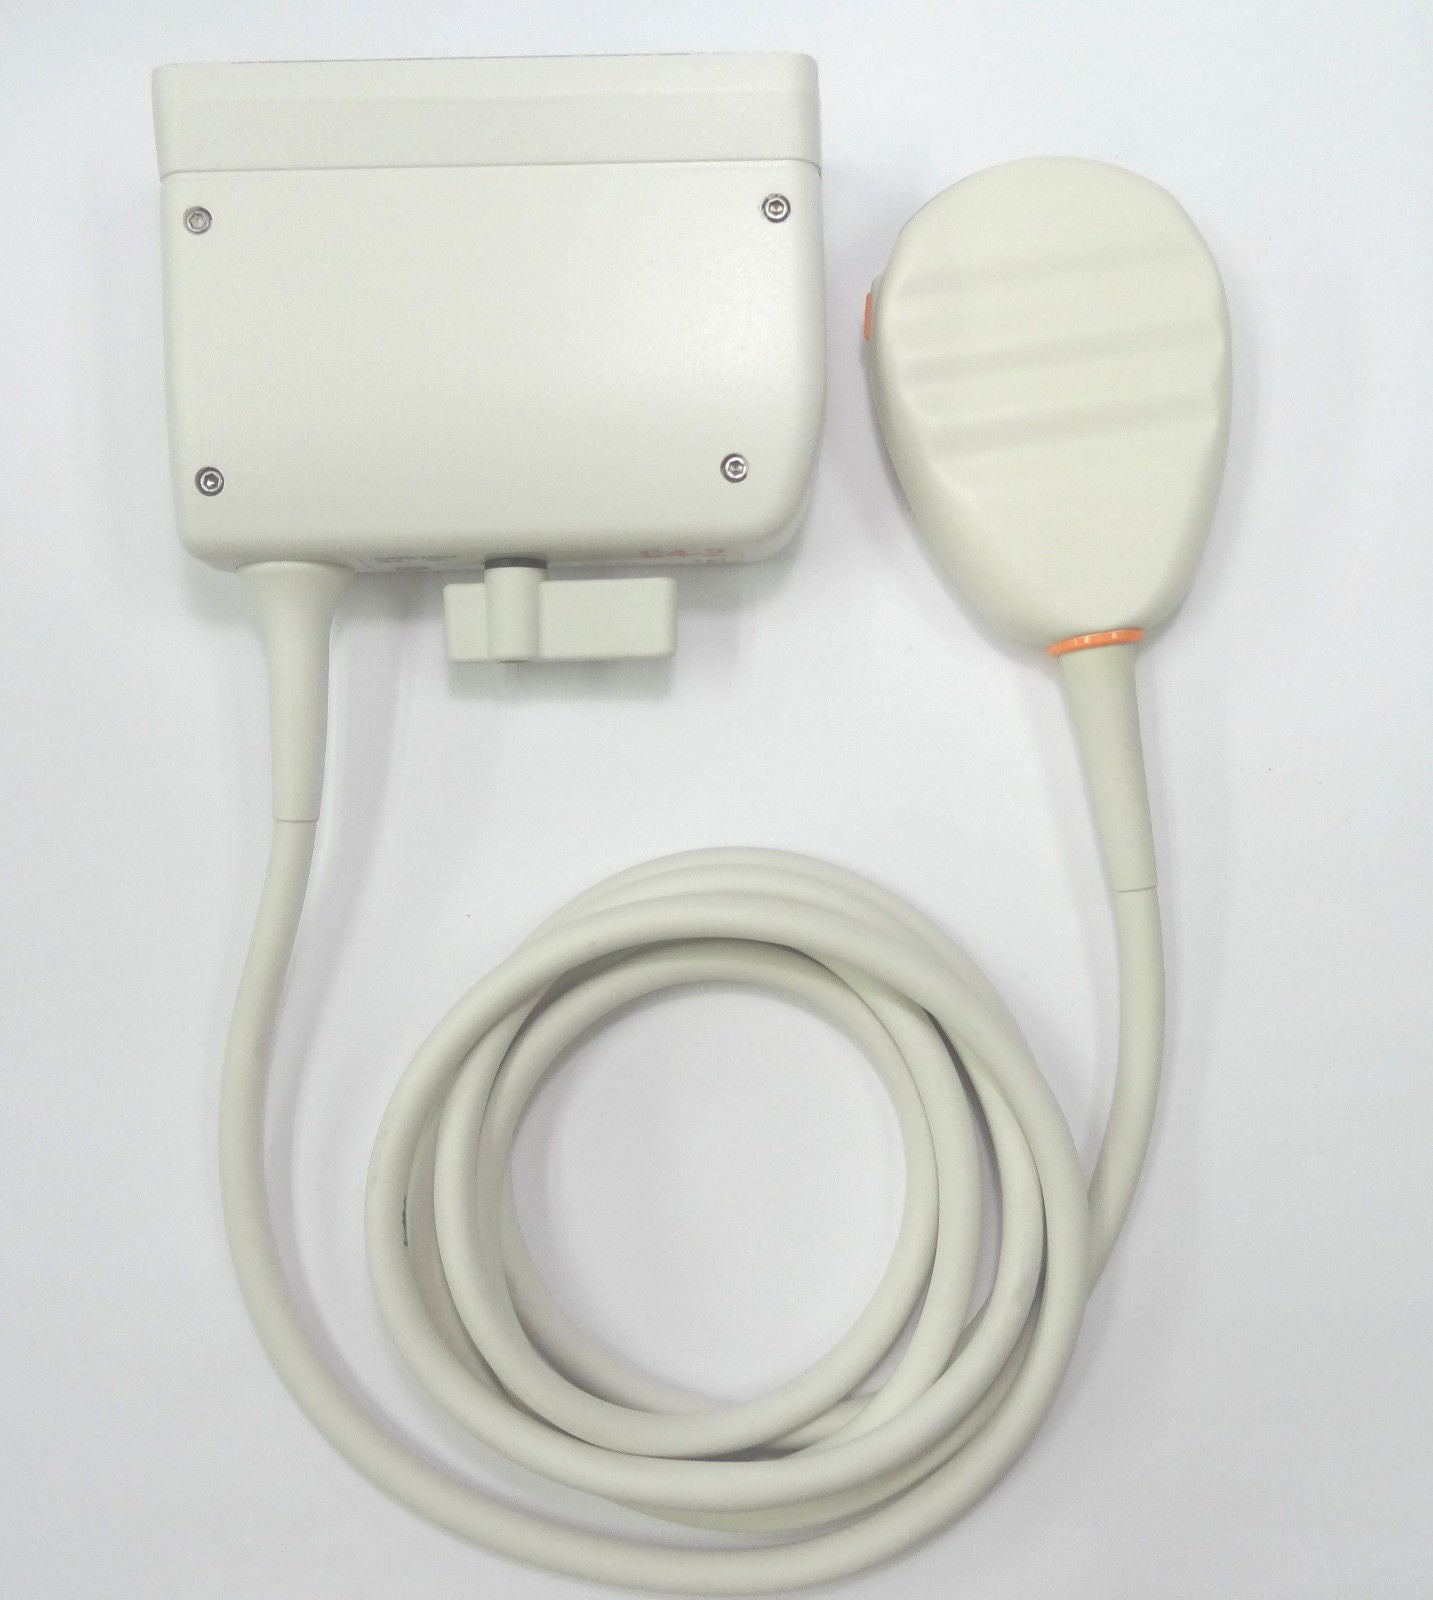 PHILIPS ATL C4-2 Curved Array Ultrasound Transducer Probe